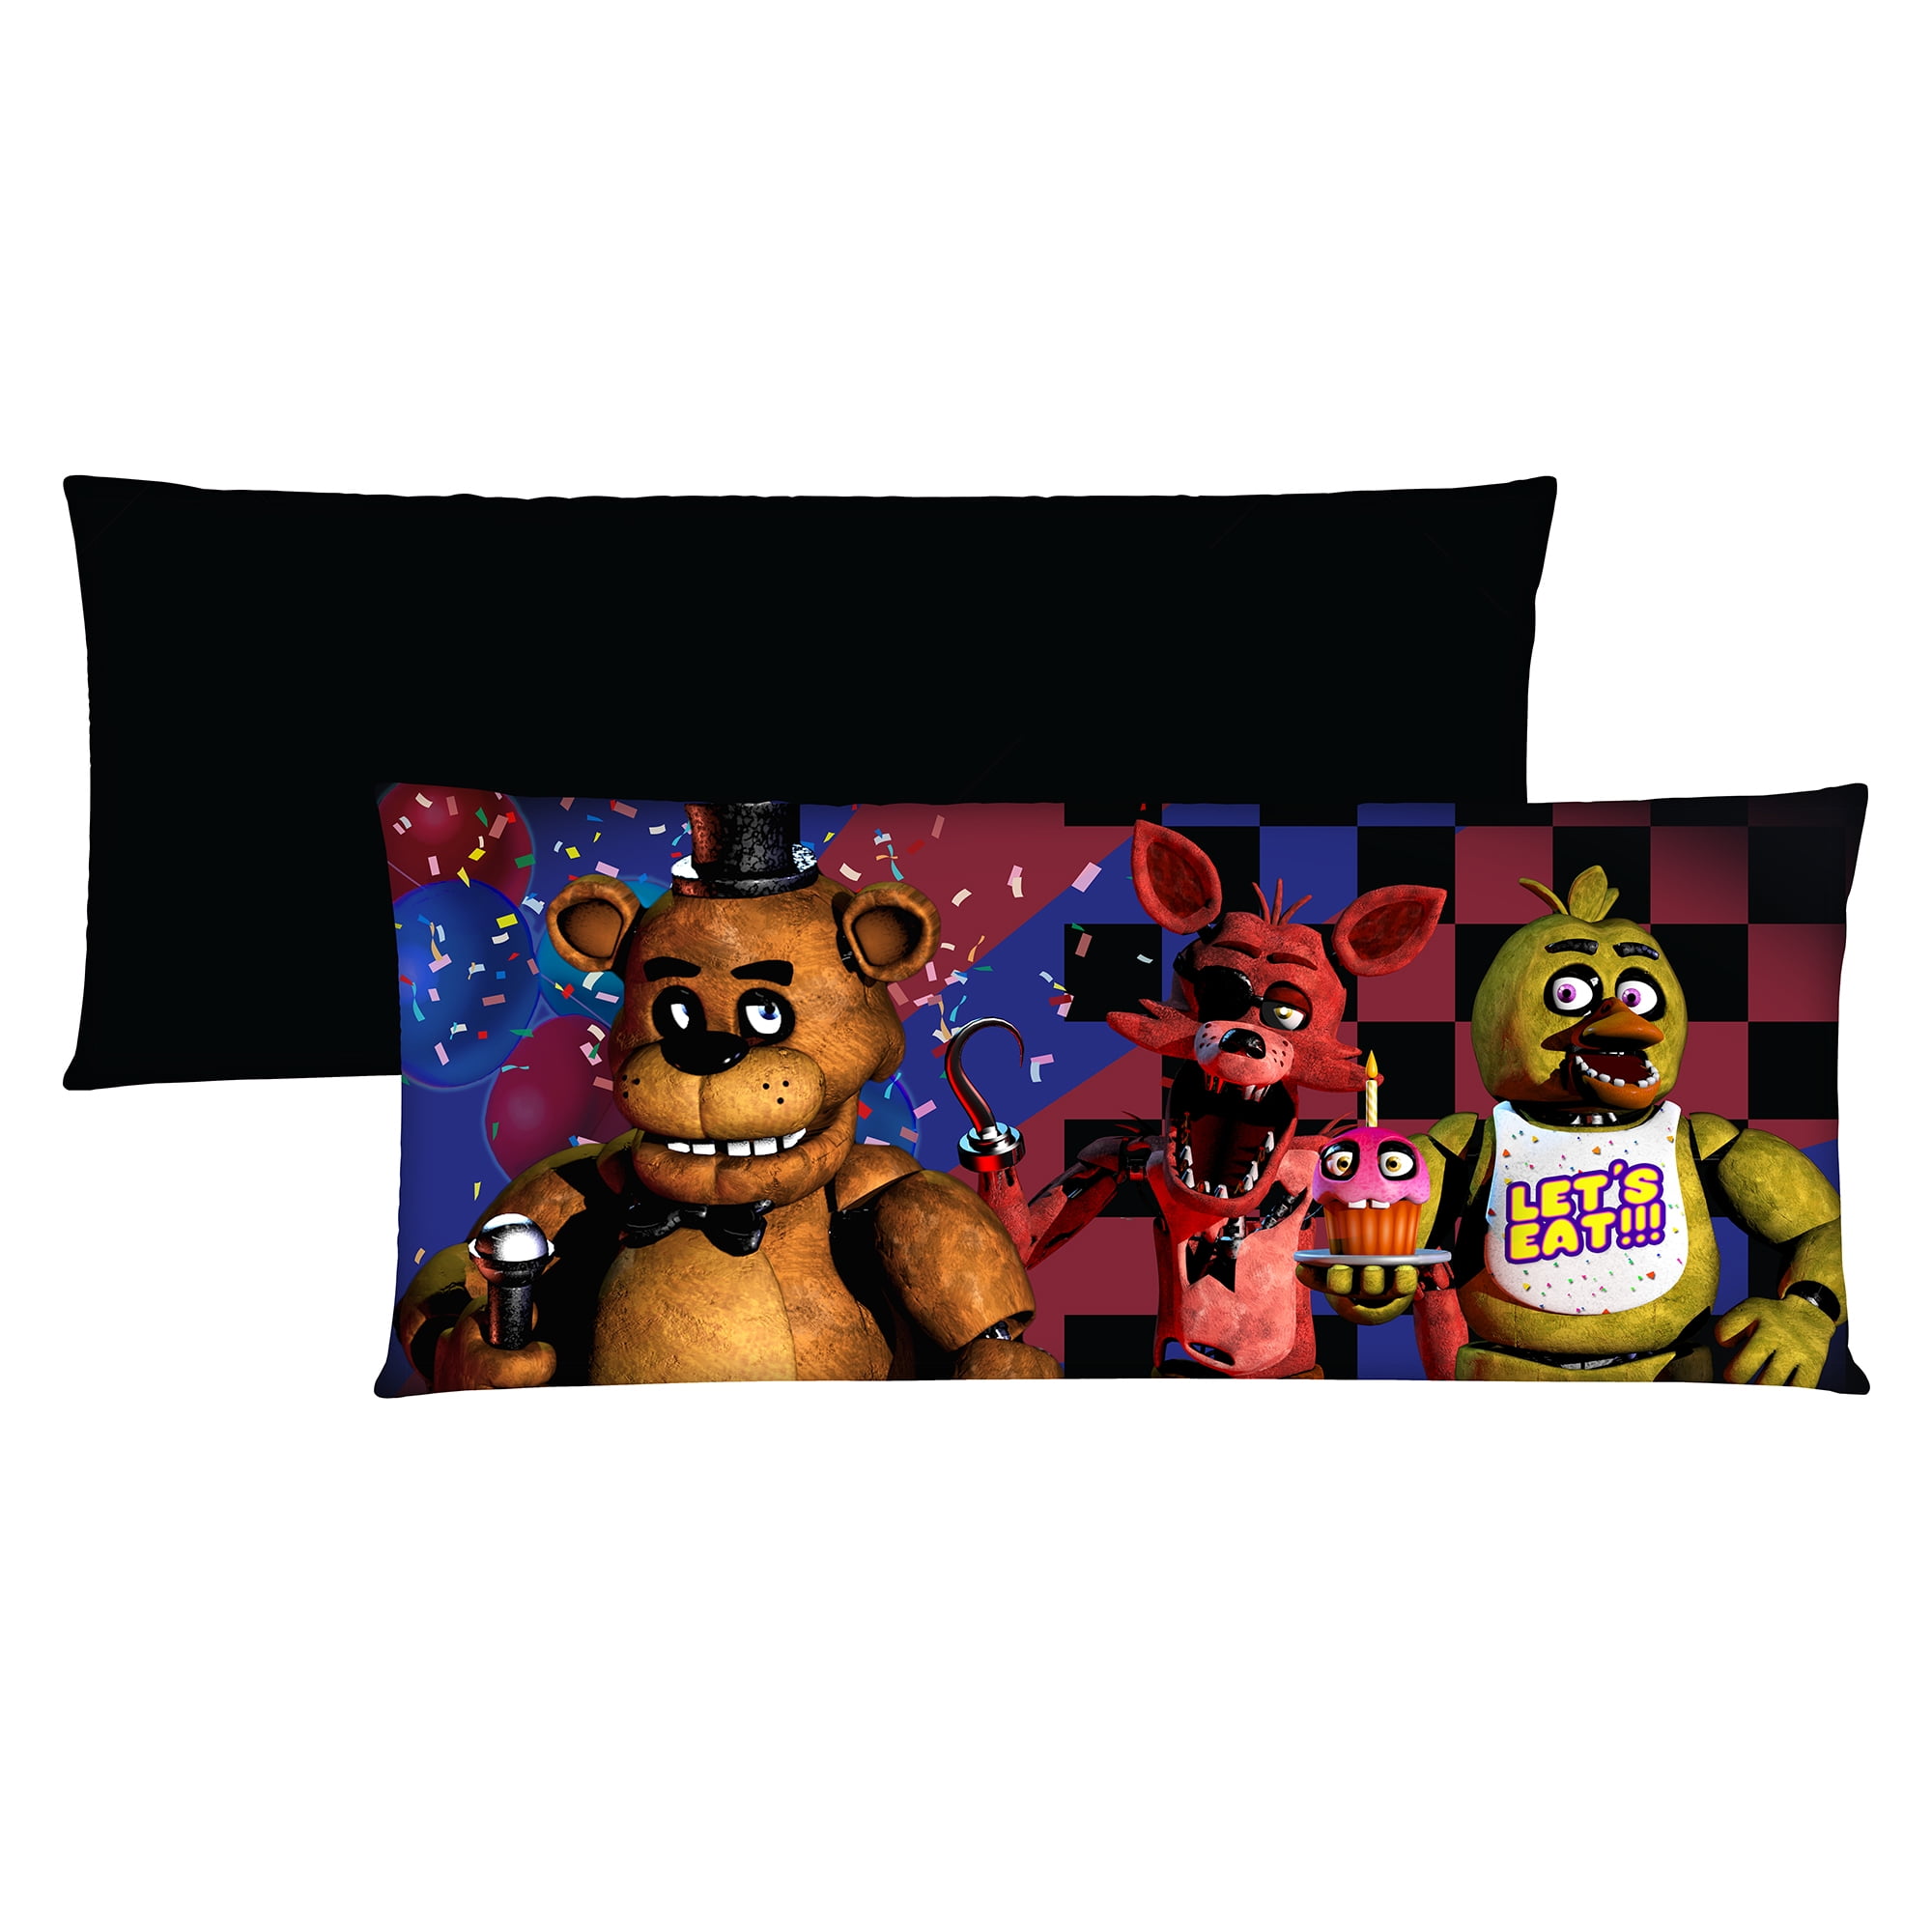 Body Pillow for Kids Top 15 Best Kids Pillows in 2020 Five Nights at Fr...